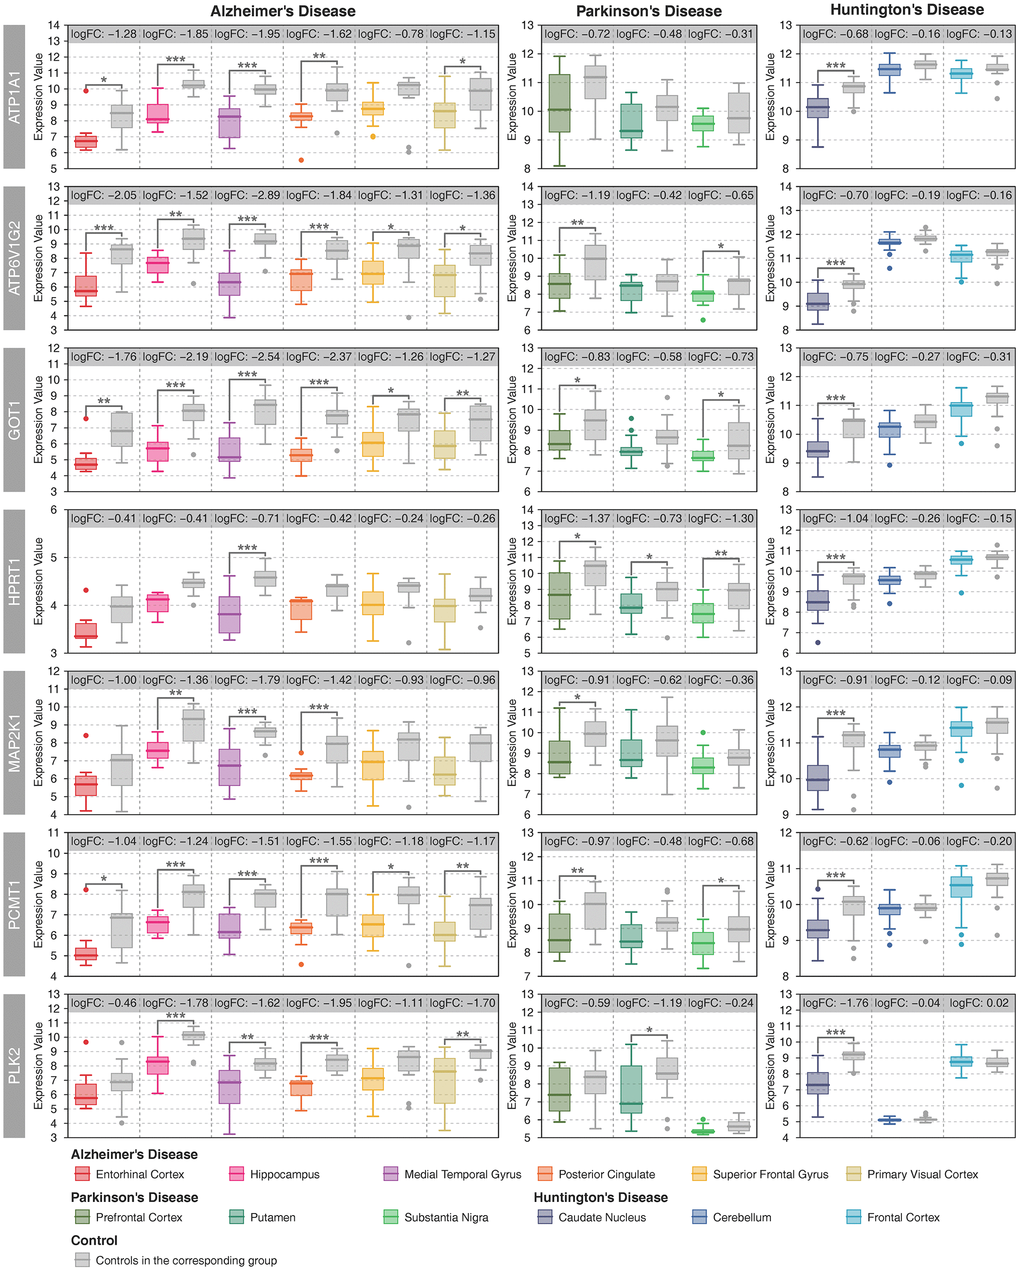 Expression patterns of key metabolic genes. Patient samples with different brain regions are represented by different colors, and the gray color represents the controls in the corresponding group. Student’s t-test was used to compare the expression differences between cases and controls. Statistical significance: * P 